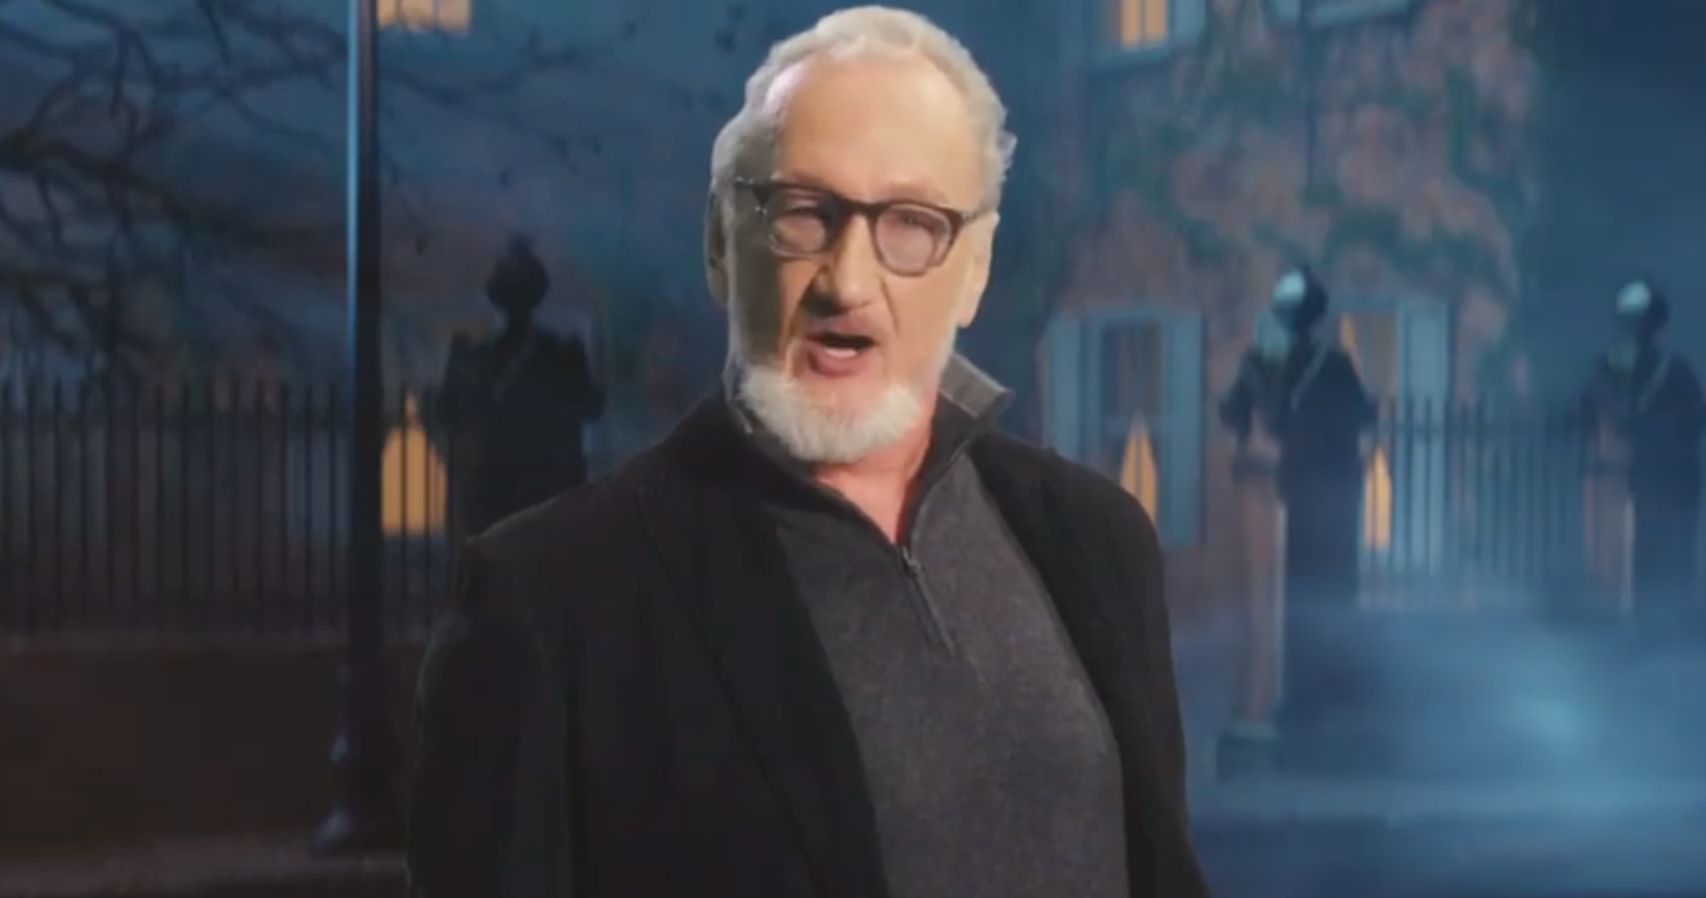 True Terror with Robert Englund Series Trailer Takes You Into Bizarre Real Life Horror